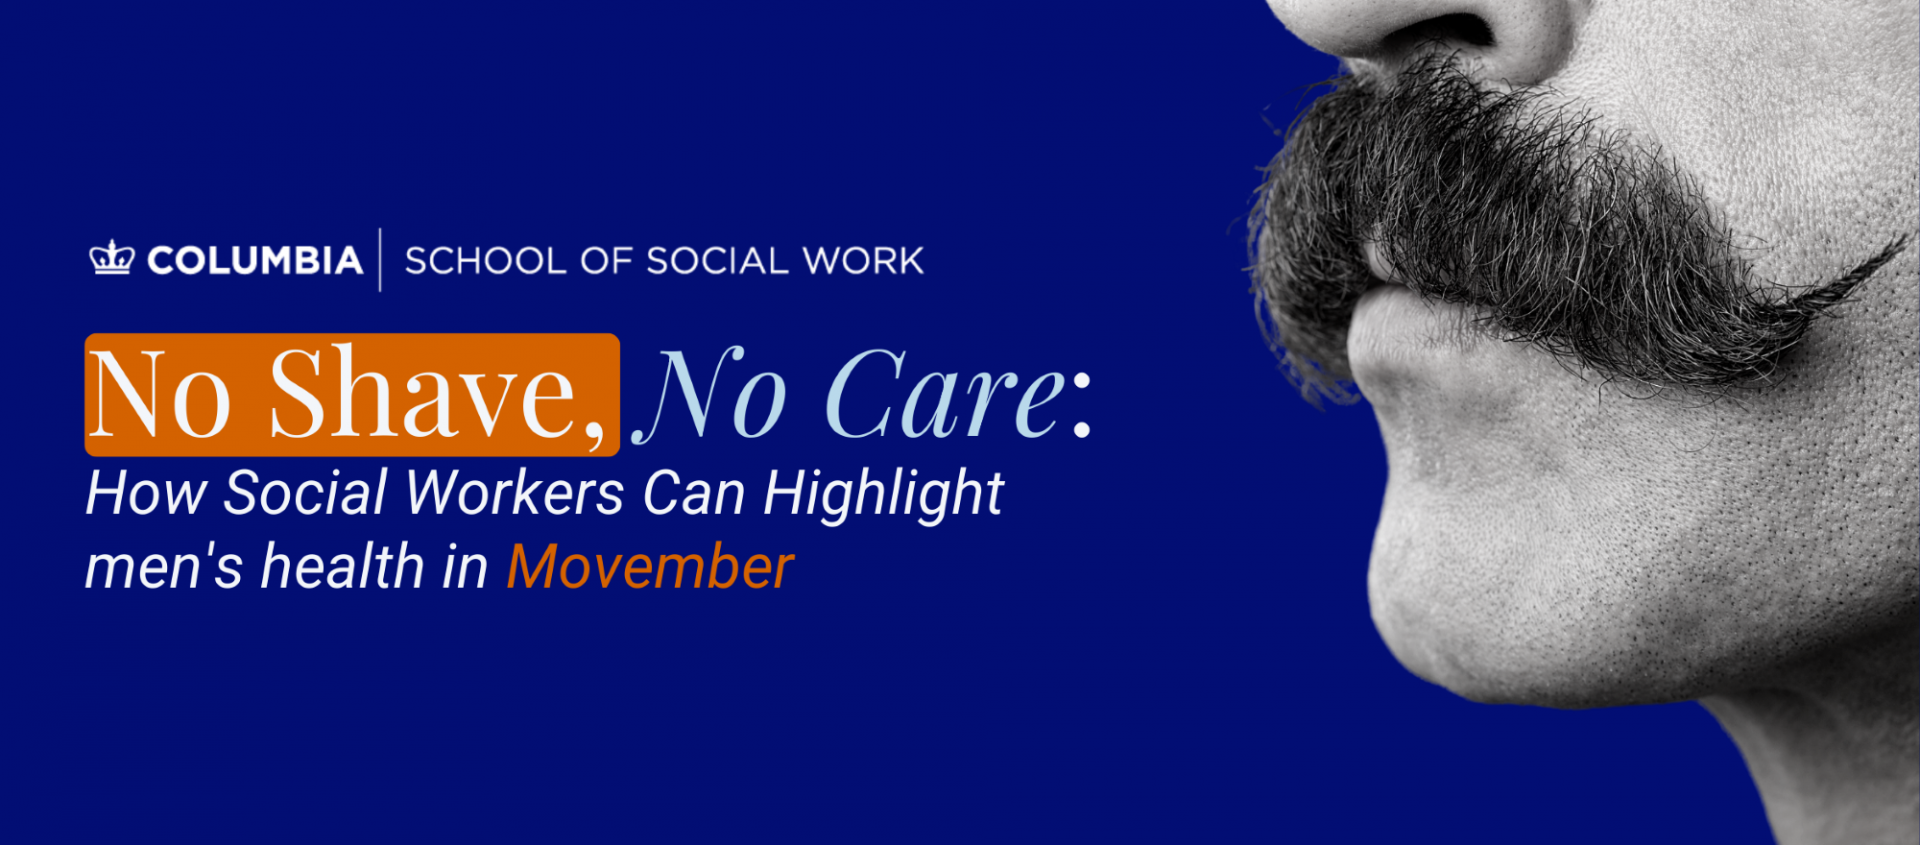 No Shave, No Care: How Social Workers Can Highlight Men's Health in Movember